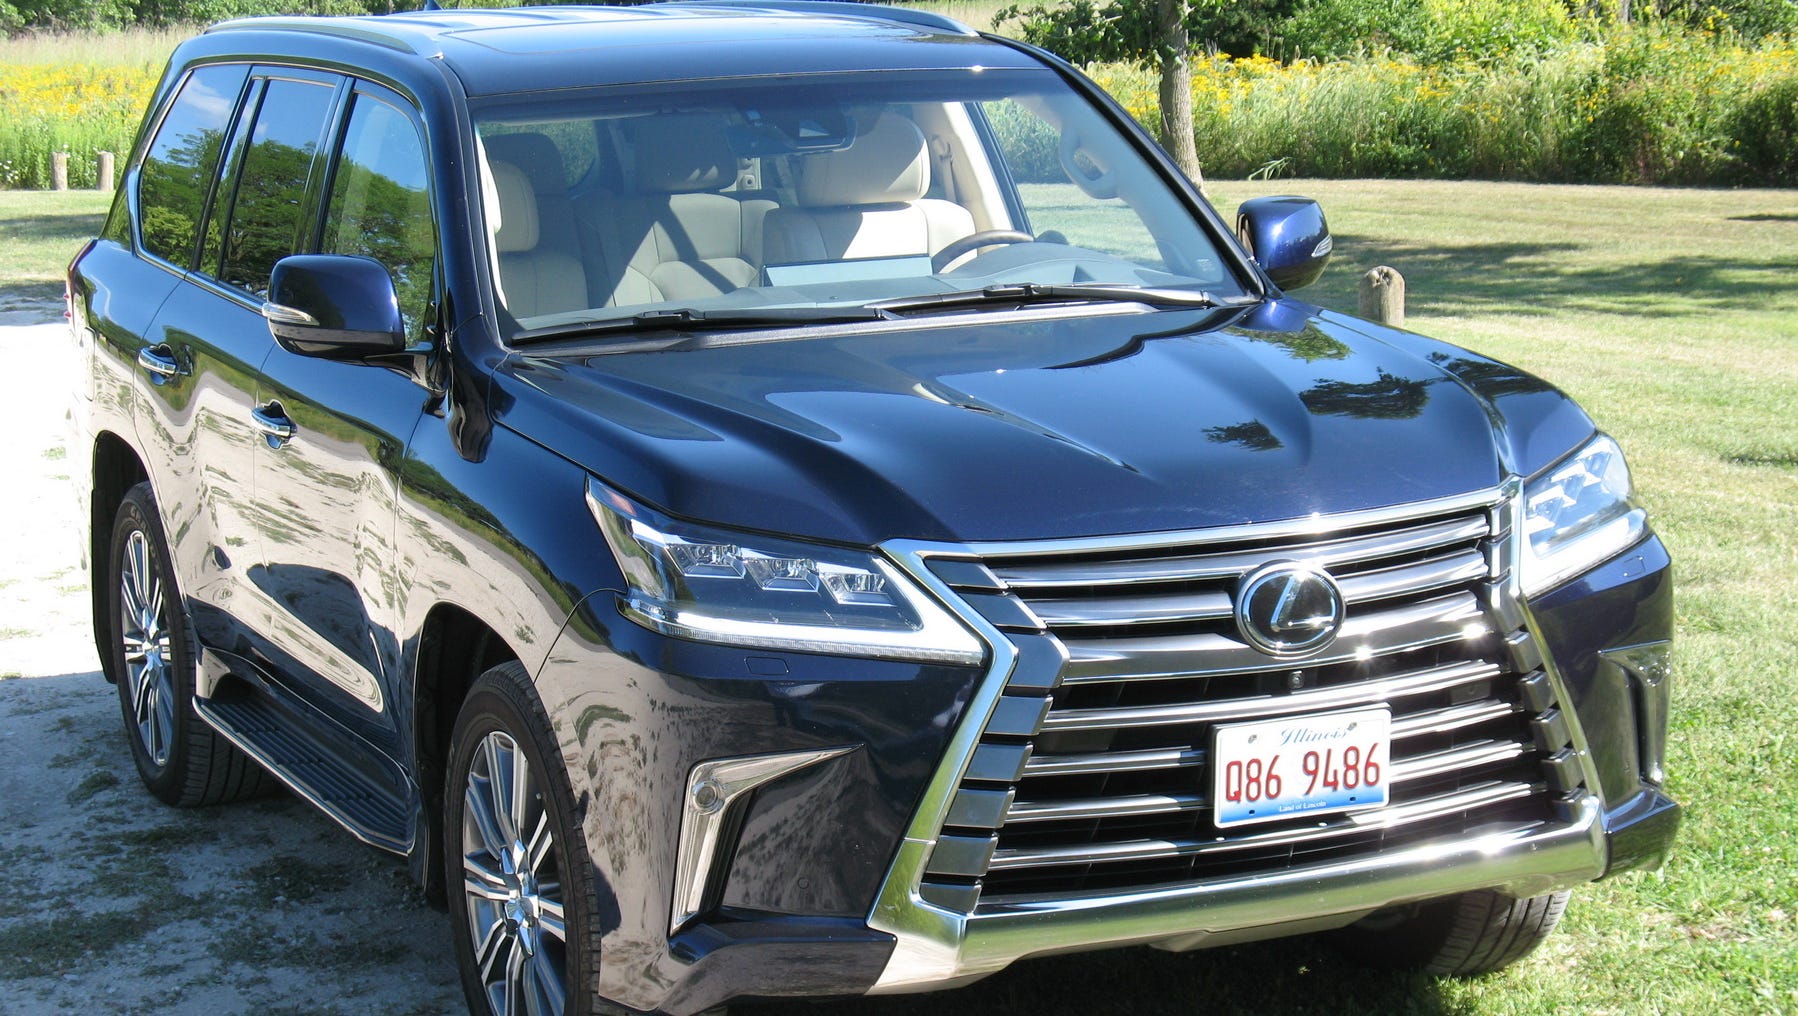 Auto review: 2017 Lexus LX 570 SUV has sweeping upgrades